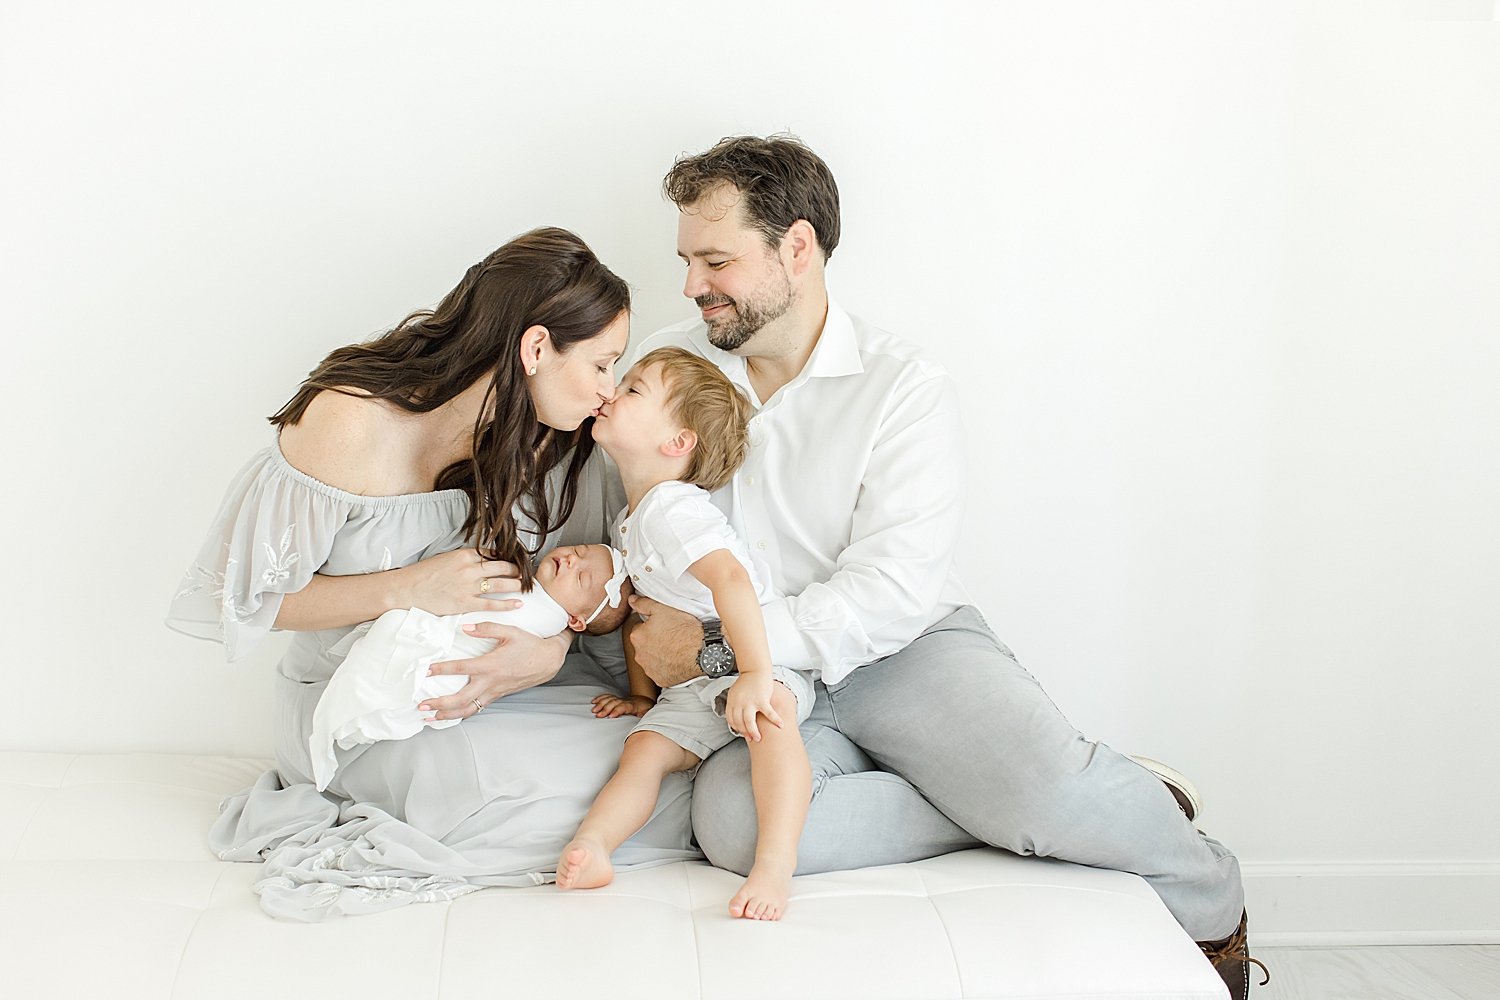 Sweet family moment during newborn session for second baby | Kristin Wood Photography